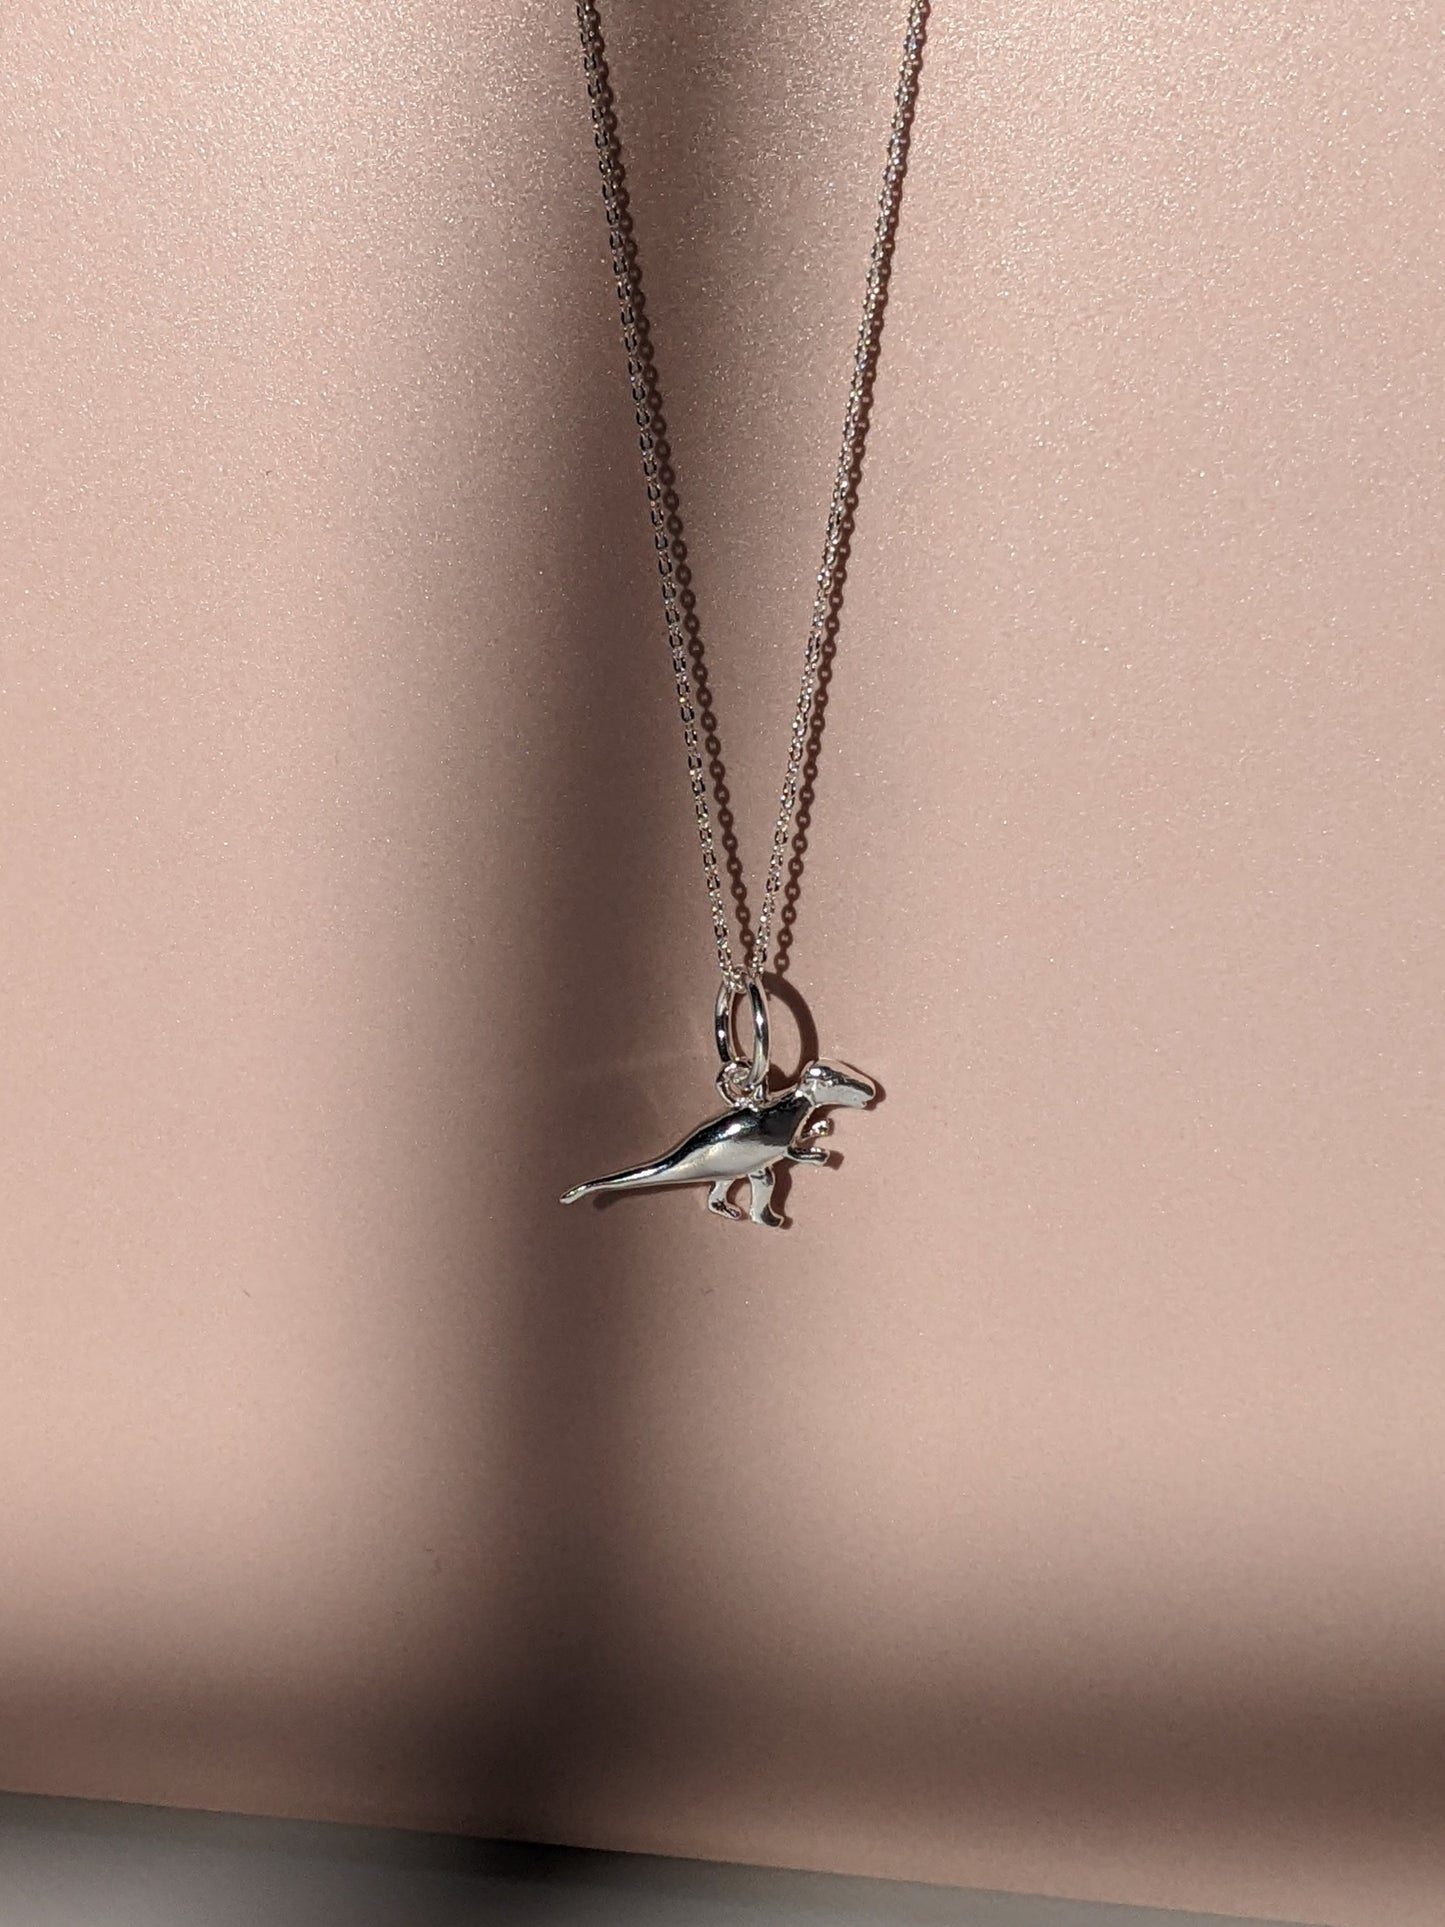 Eric the Dino Sterling Silver necklace